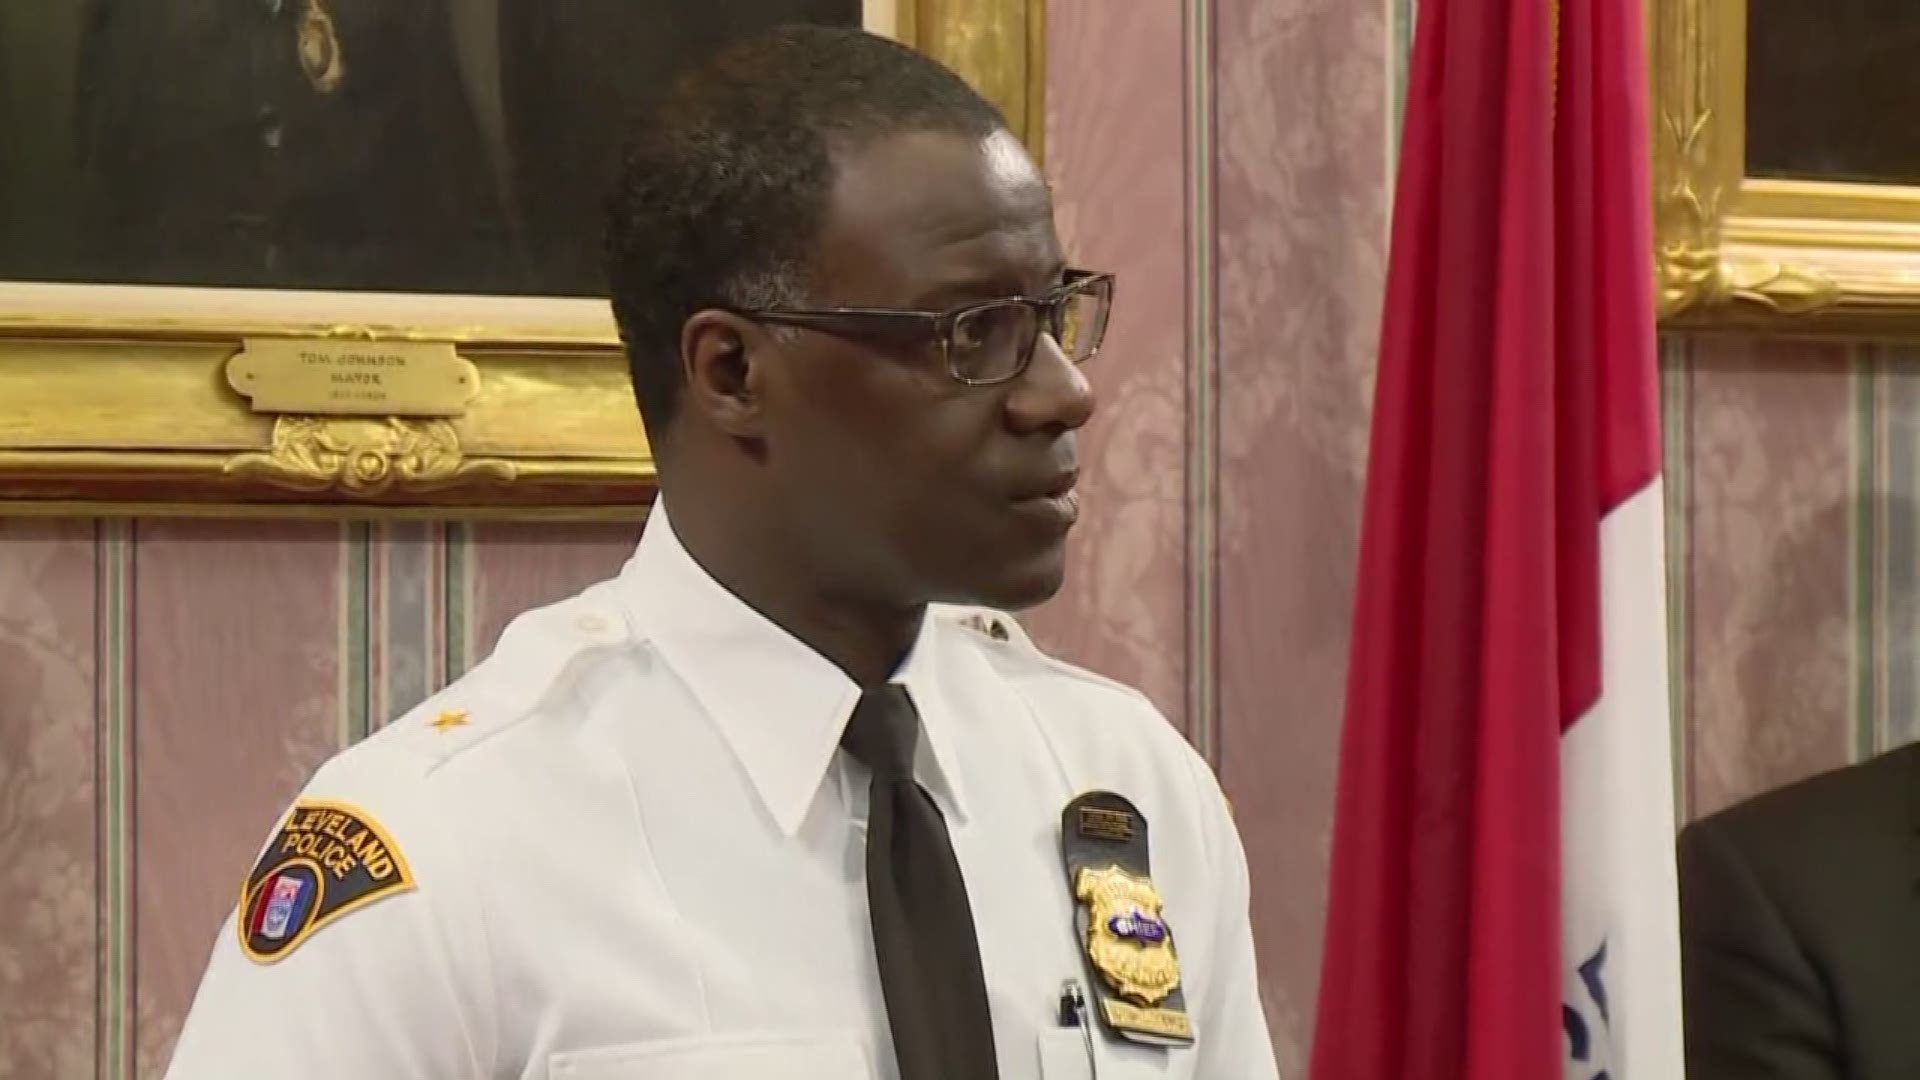 April 17, 2017: Cleveland Police Chief Calvin Williams said that numerous GoFundMe accounts set for Robert Godwin, Sr. are fake.